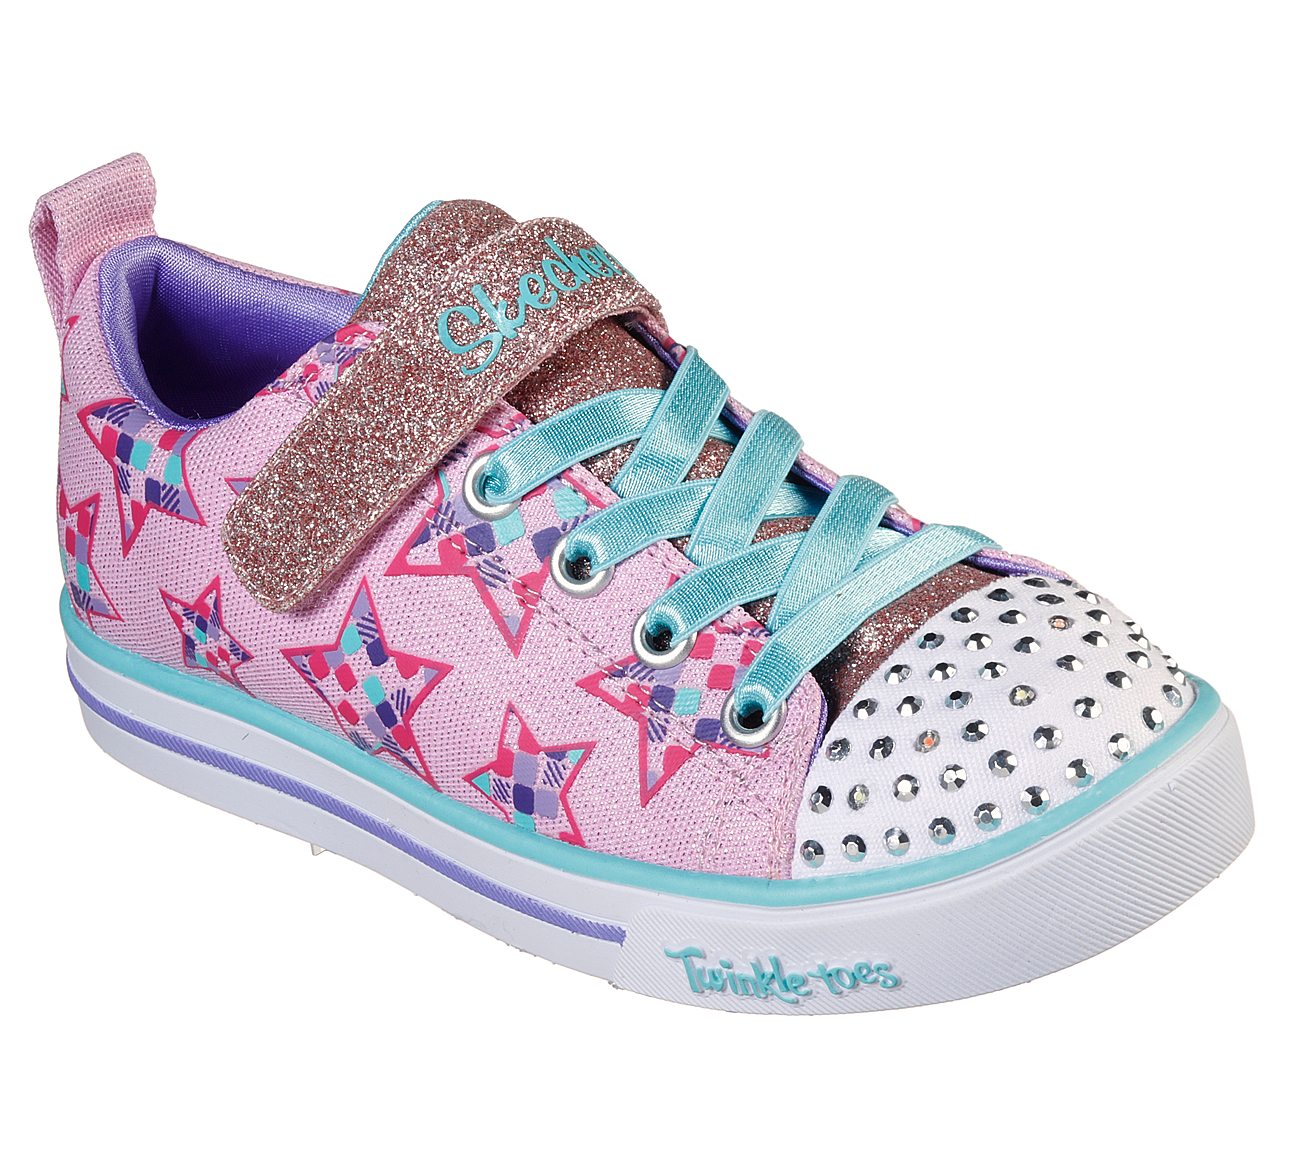 skechers lace up sneakers 2014